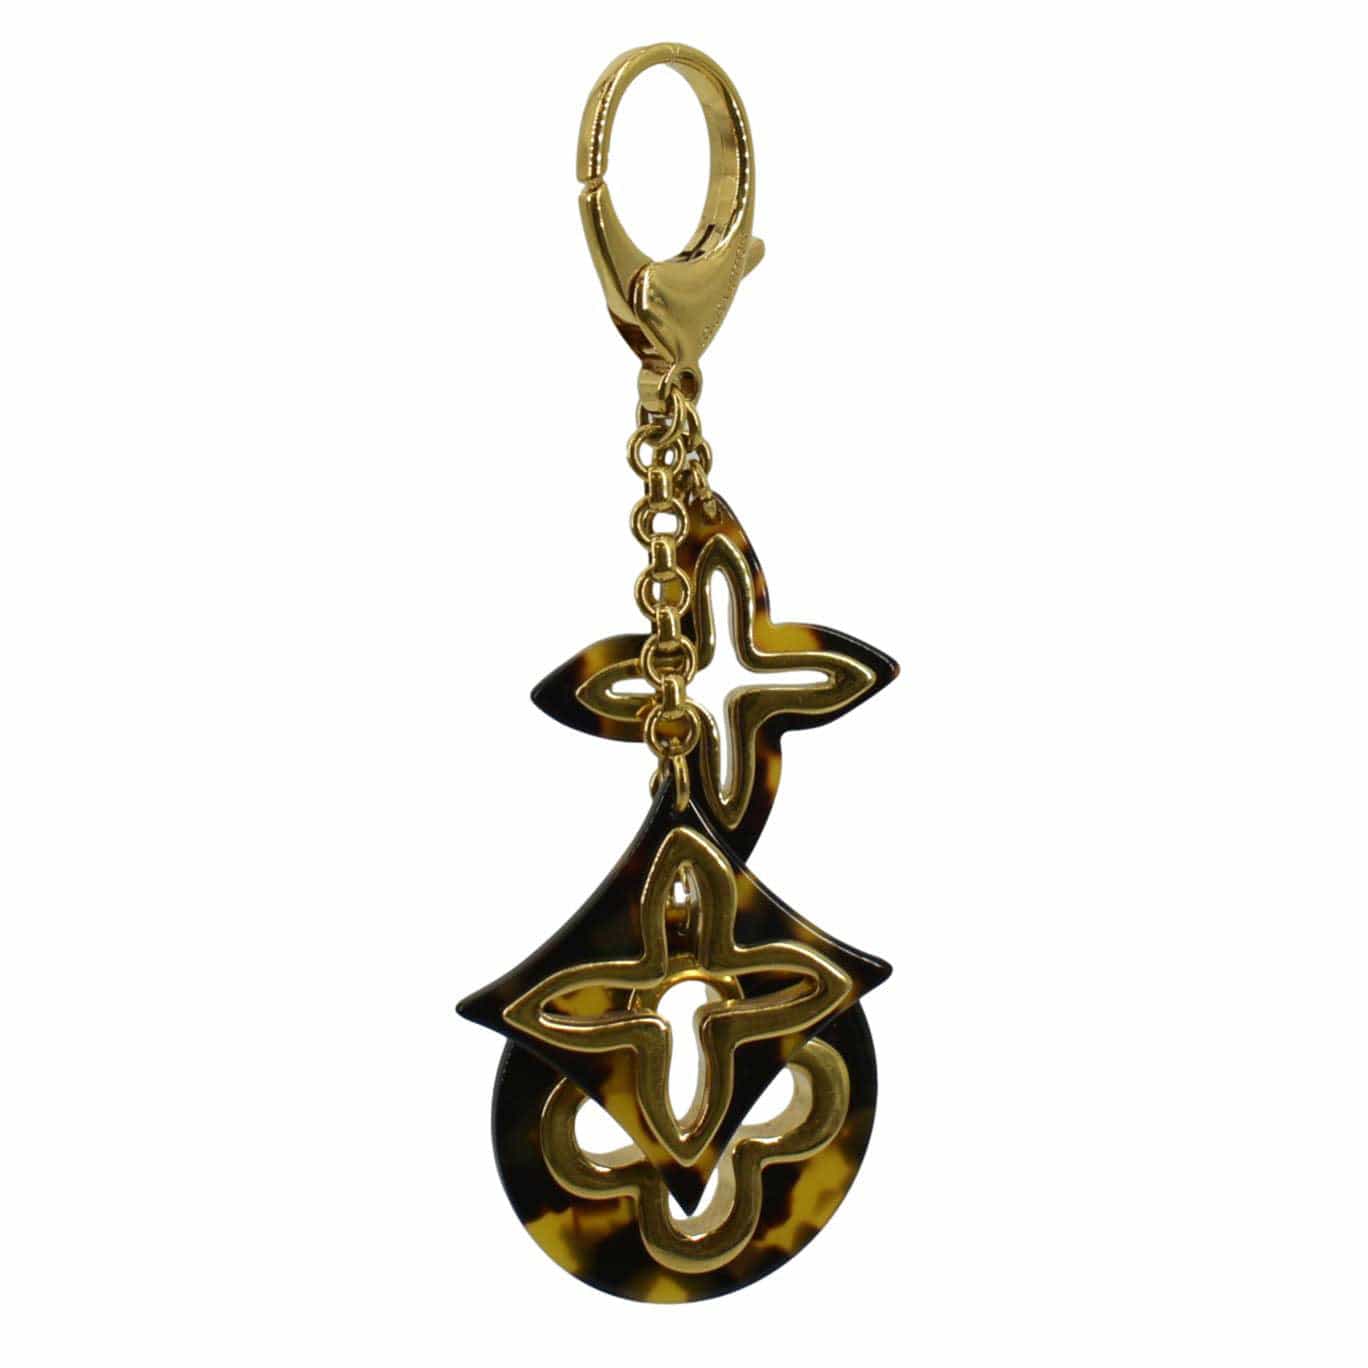 Sold at Auction: Louis Vuitton, Insolence bag charm